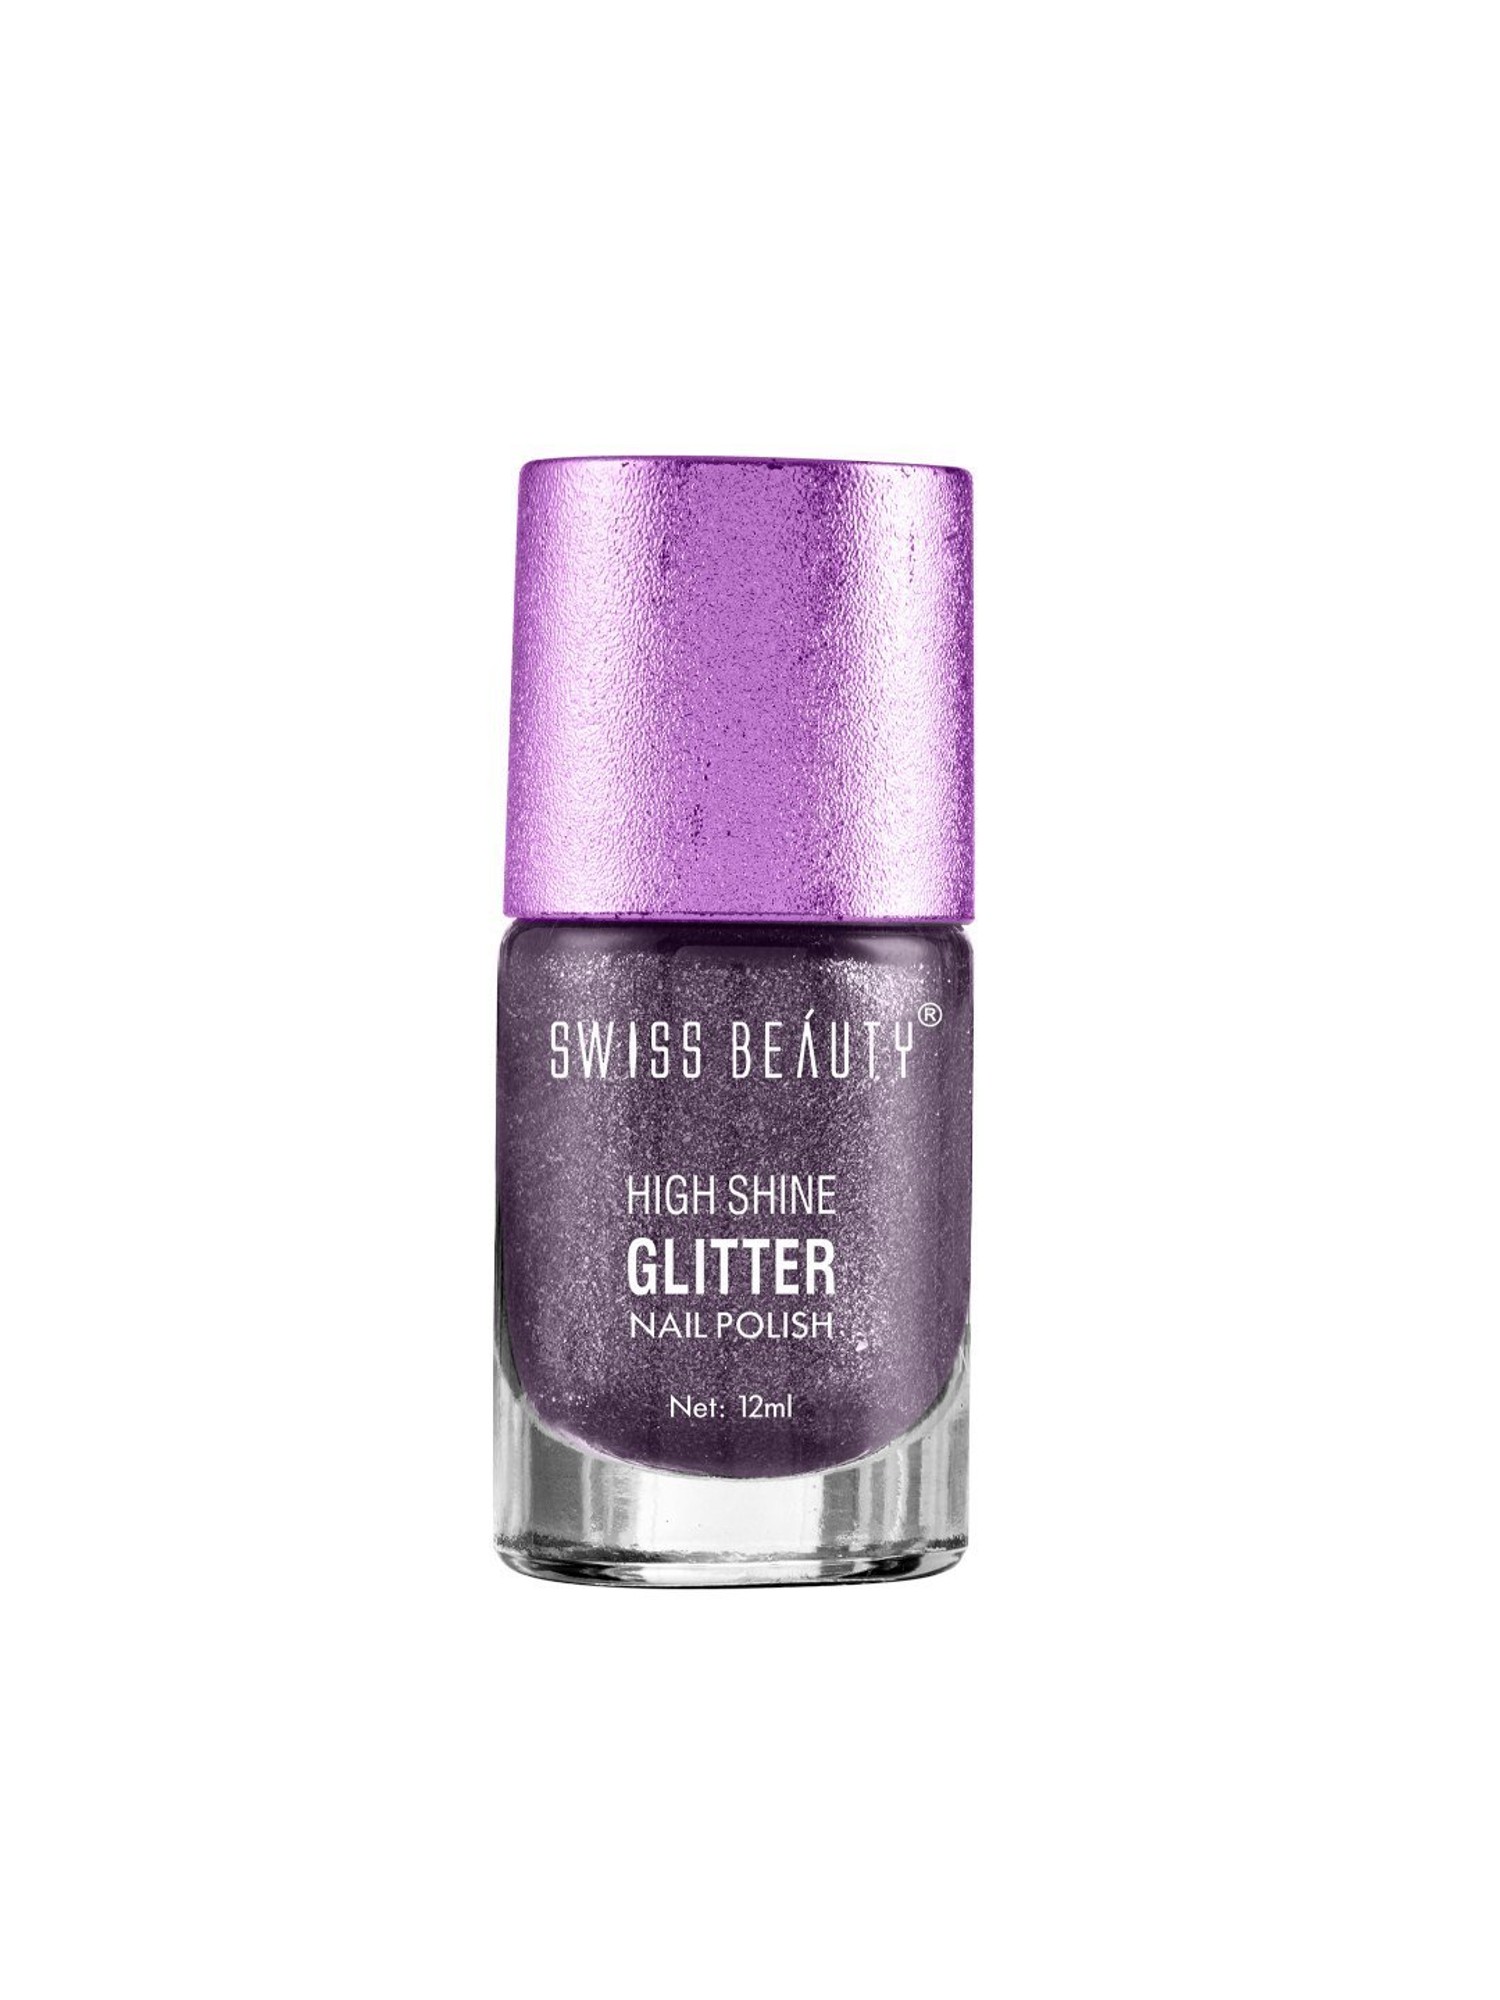 SWISS BEAUTY Stunning Nail Polish (SB-105-54) | Long Lasting | Expresso -  Price in India, Buy SWISS BEAUTY Stunning Nail Polish (SB-105-54) | Long  Lasting | Expresso Online In India, Reviews, Ratings & Features |  Flipkart.com